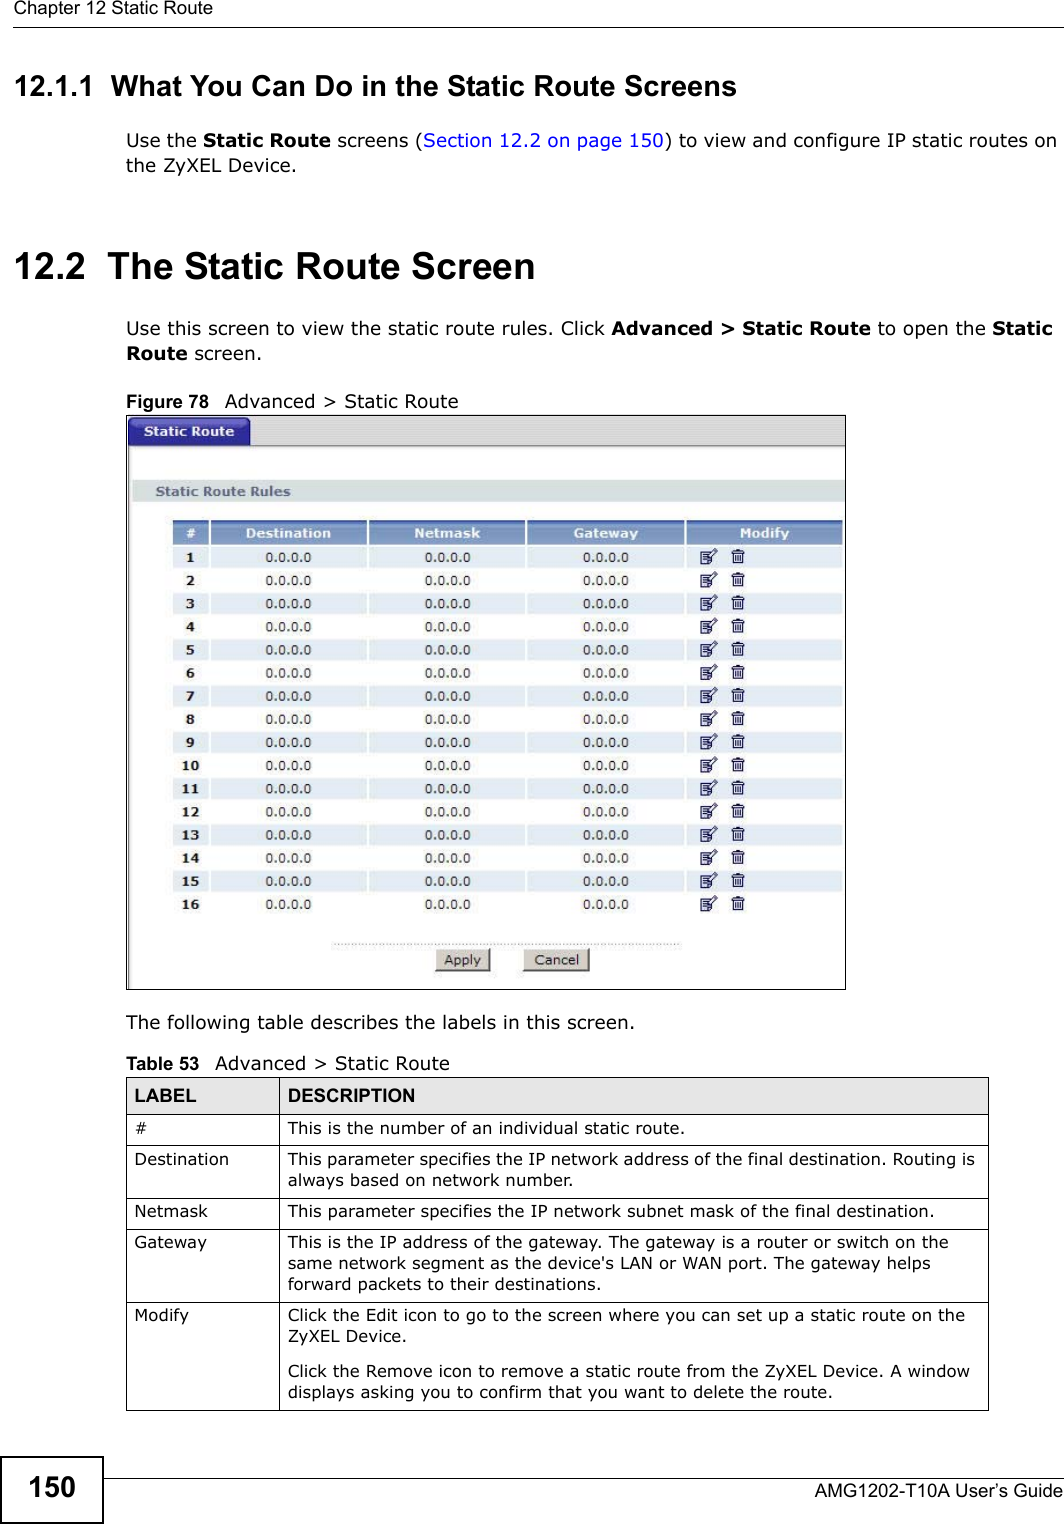 Chapter 12 Static RouteAMG1202-T10A User’s Guide15012.1.1  What You Can Do in the Static Route ScreensUse the Static Route screens (Section 12.2 on page 150) to view and configure IP static routes on the ZyXEL Device.12.2  The Static Route ScreenUse this screen to view the static route rules. Click Advanced &gt; Static Route to open the Static Route screen.Figure 78   Advanced &gt; Static RouteThe following table describes the labels in this screen. Table 53   Advanced &gt; Static RouteLABEL DESCRIPTION#This is the number of an individual static route.Destination This parameter specifies the IP network address of the final destination. Routing is always based on network number. Netmask This parameter specifies the IP network subnet mask of the final destination.Gateway This is the IP address of the gateway. The gateway is a router or switch on the same network segment as the device&apos;s LAN or WAN port. The gateway helps forward packets to their destinations.Modify Click the Edit icon to go to the screen where you can set up a static route on the ZyXEL Device.Click the Remove icon to remove a static route from the ZyXEL Device. A window displays asking you to confirm that you want to delete the route. 